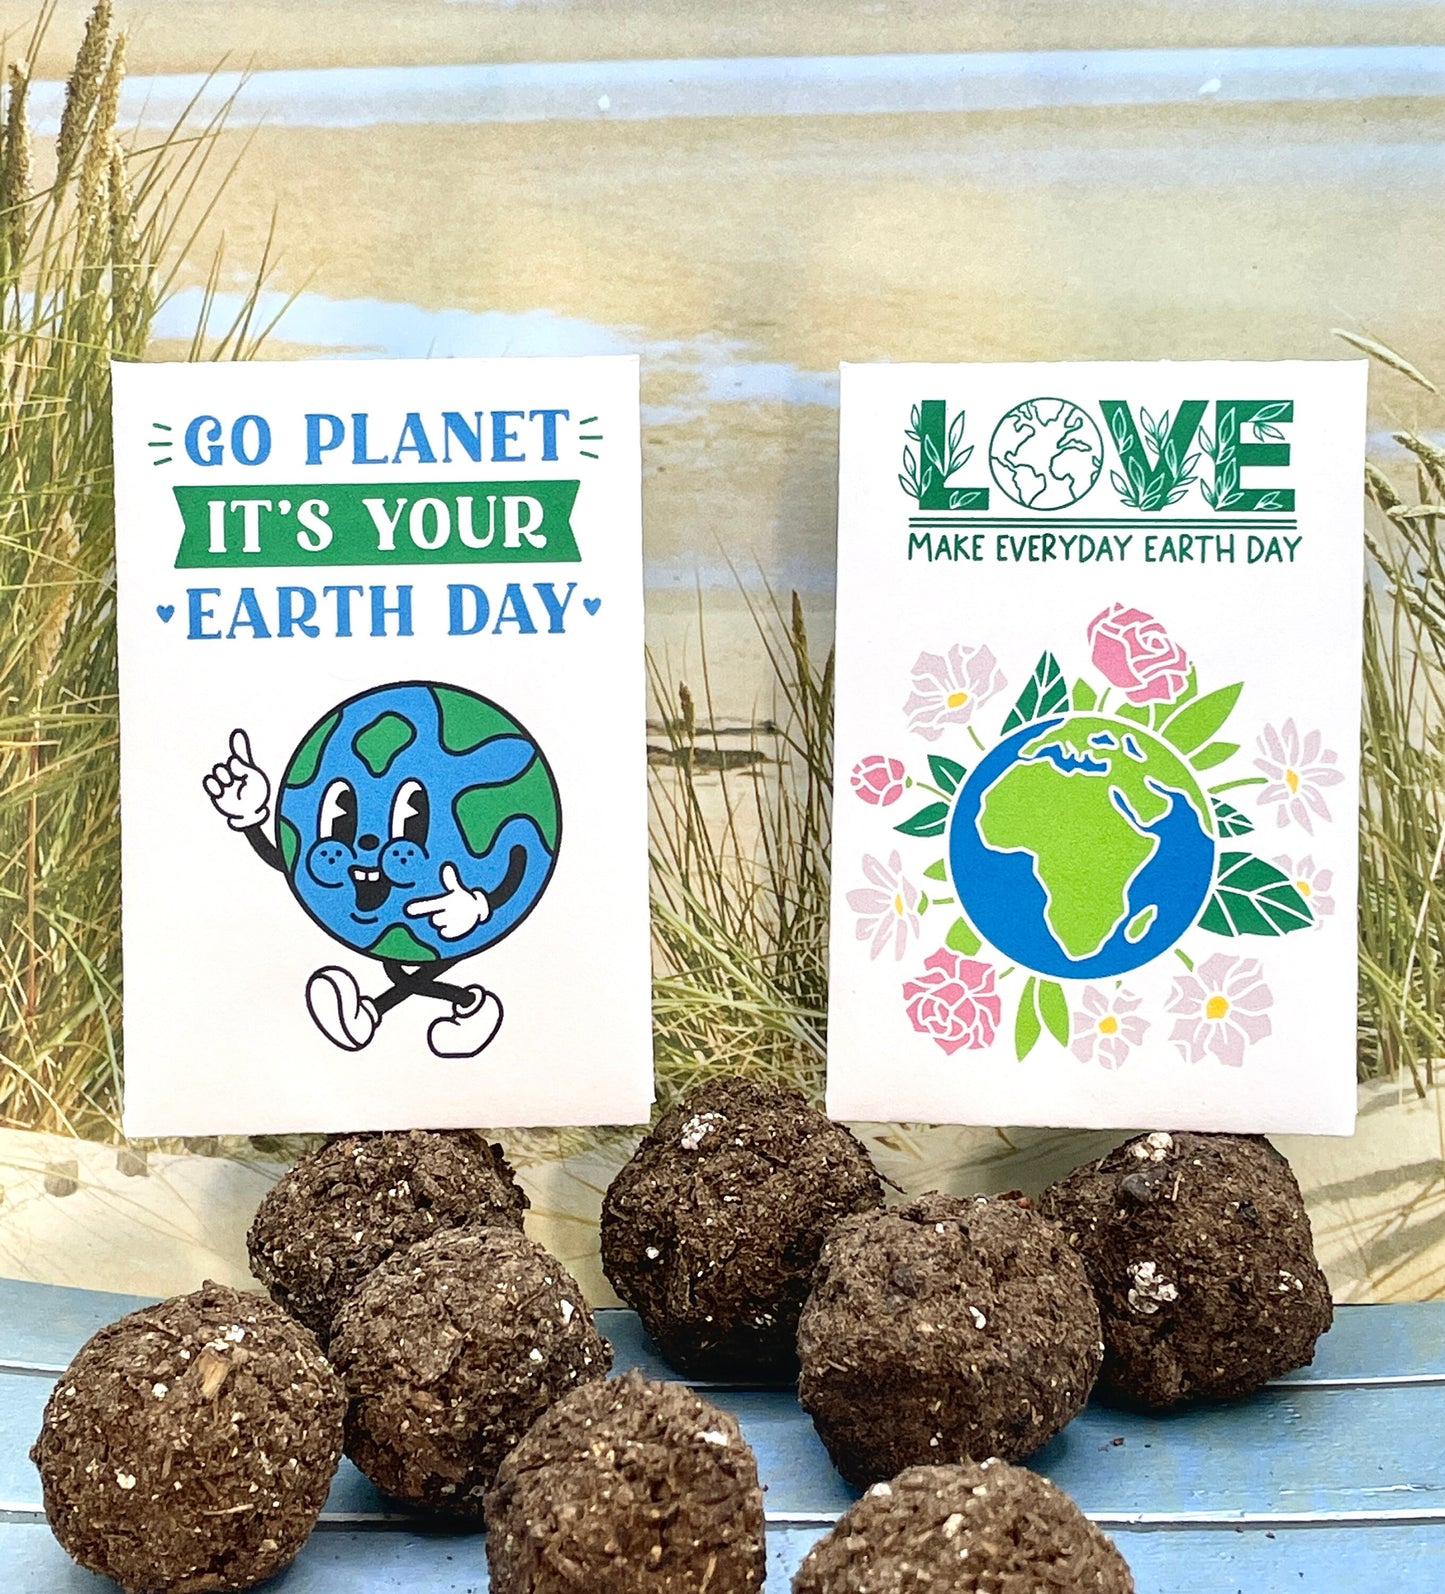 10 Pack - Earth Day themed seed package with Delphiniums - April 22, 2023